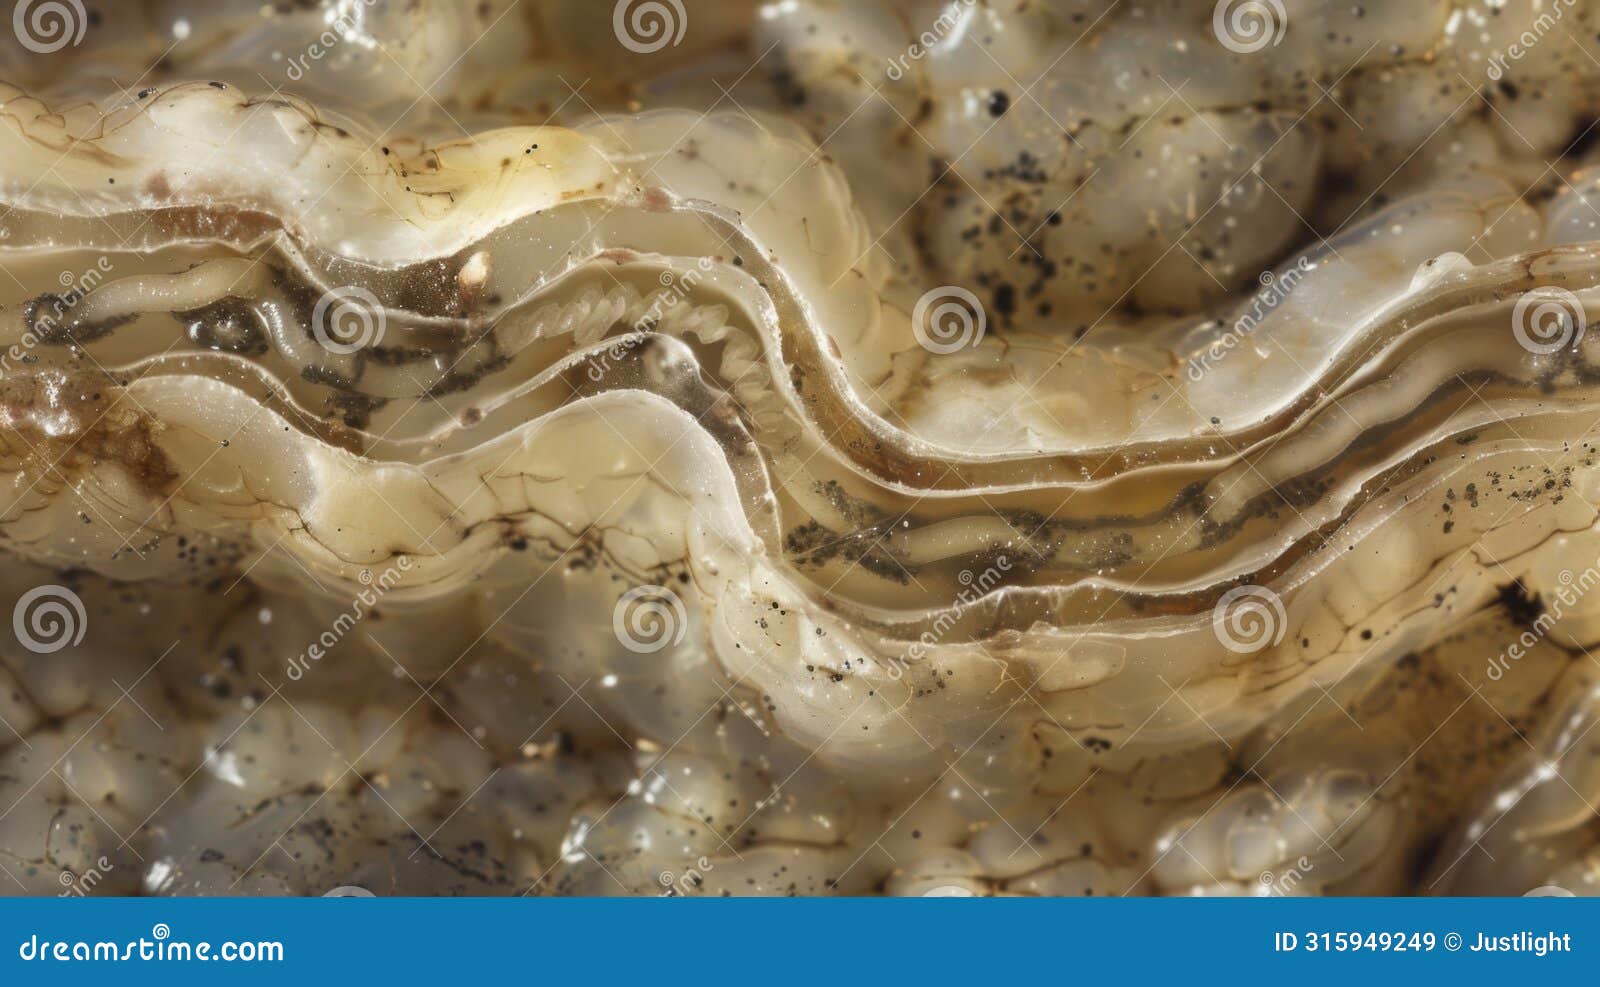 a crosssection of a nematode showcasing its and digestive system. the dark twisting tunnels of its gut are contrasted